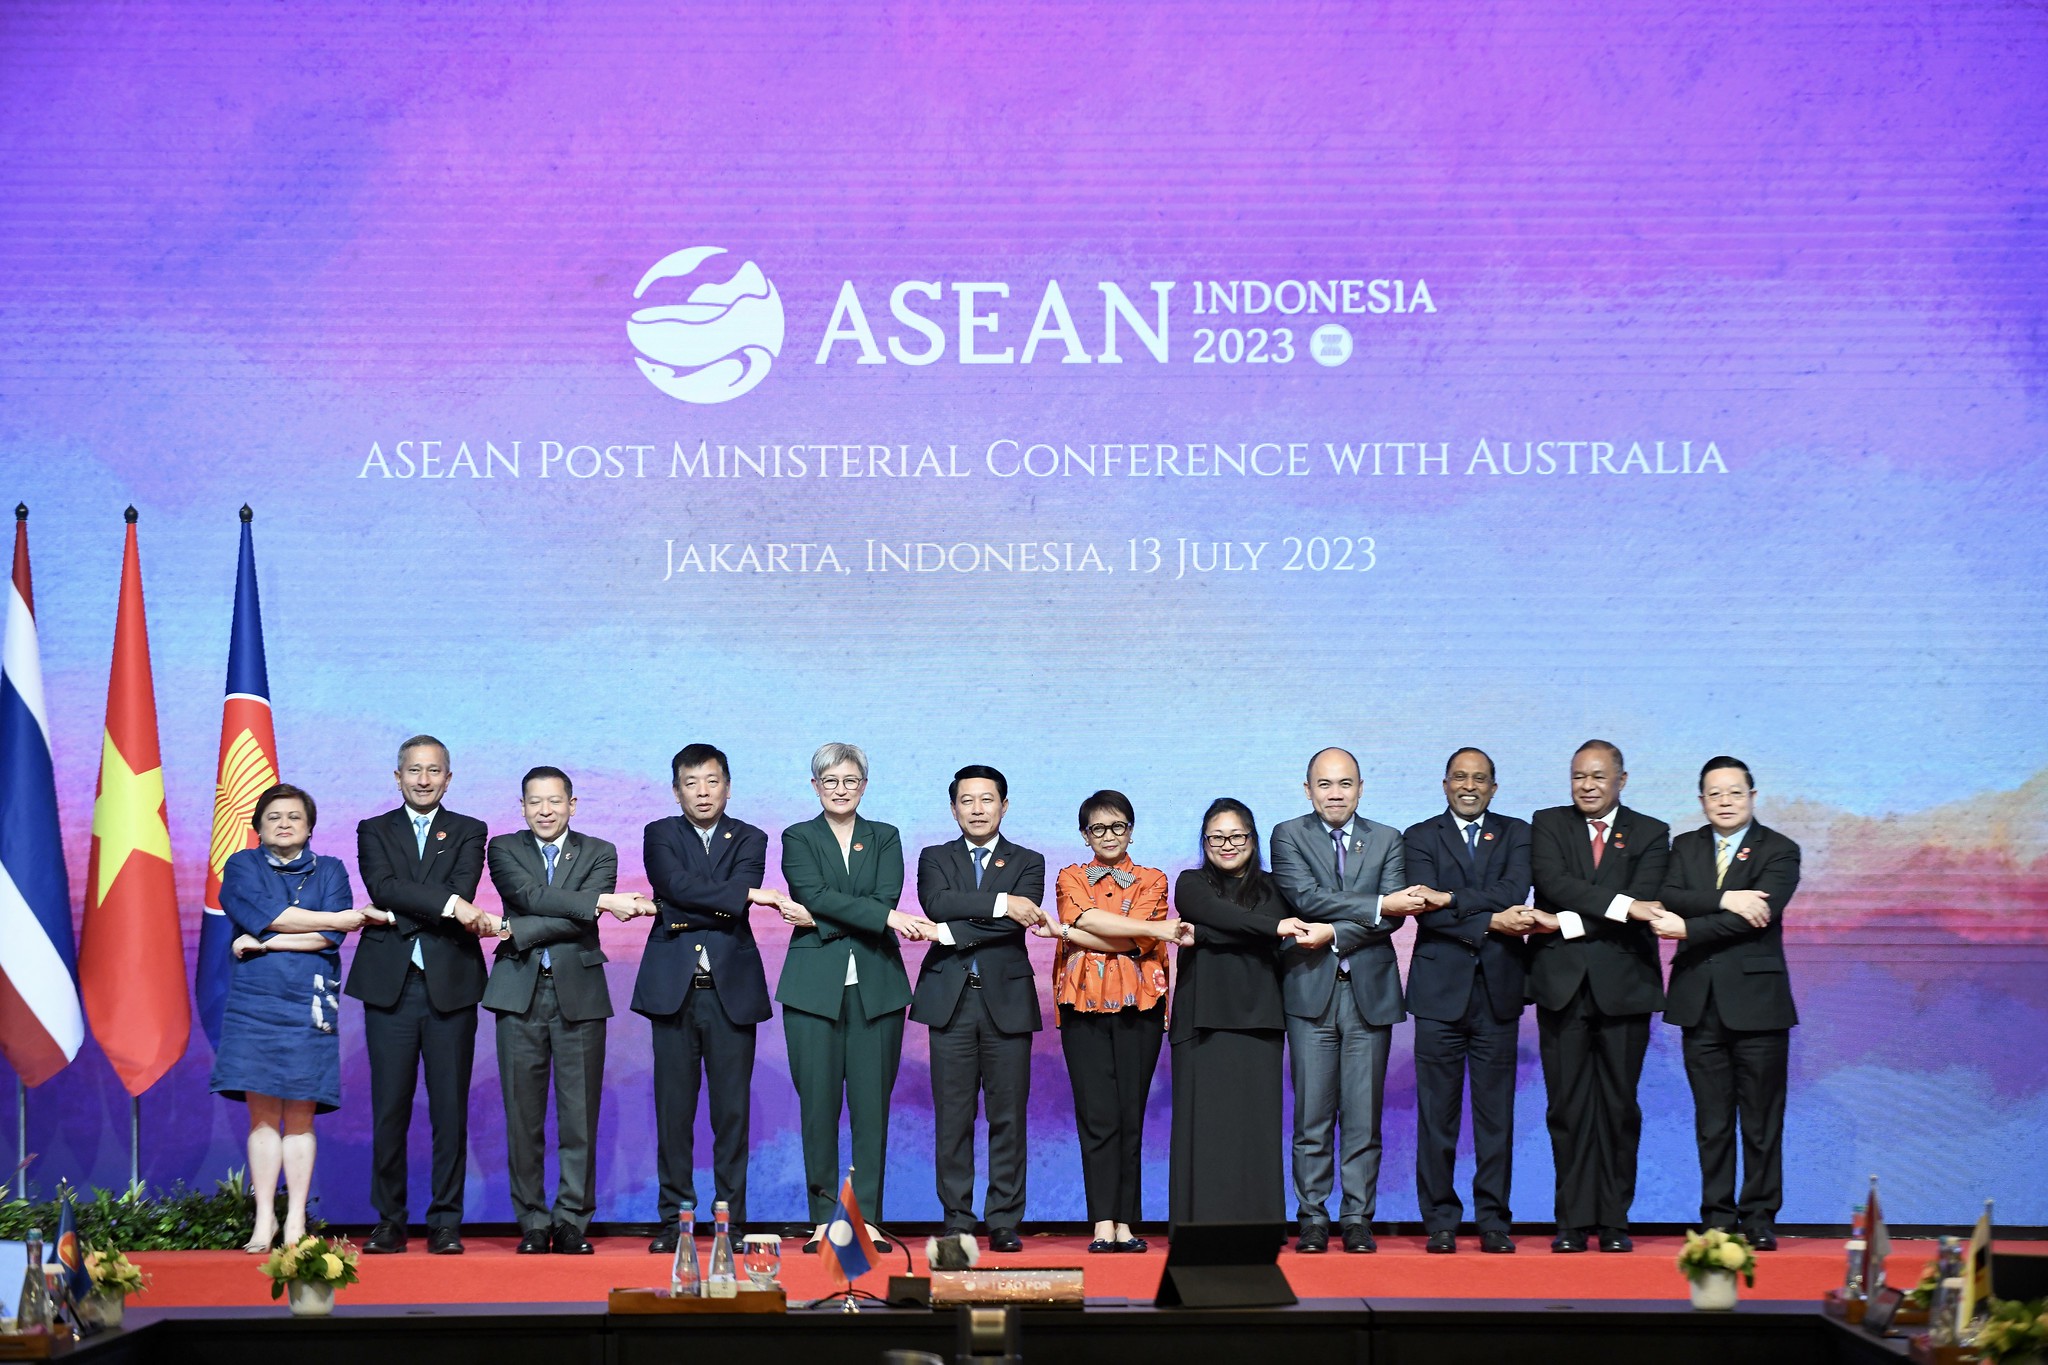 ASEAN Post Ministerial Conference with Australia discusses progress in